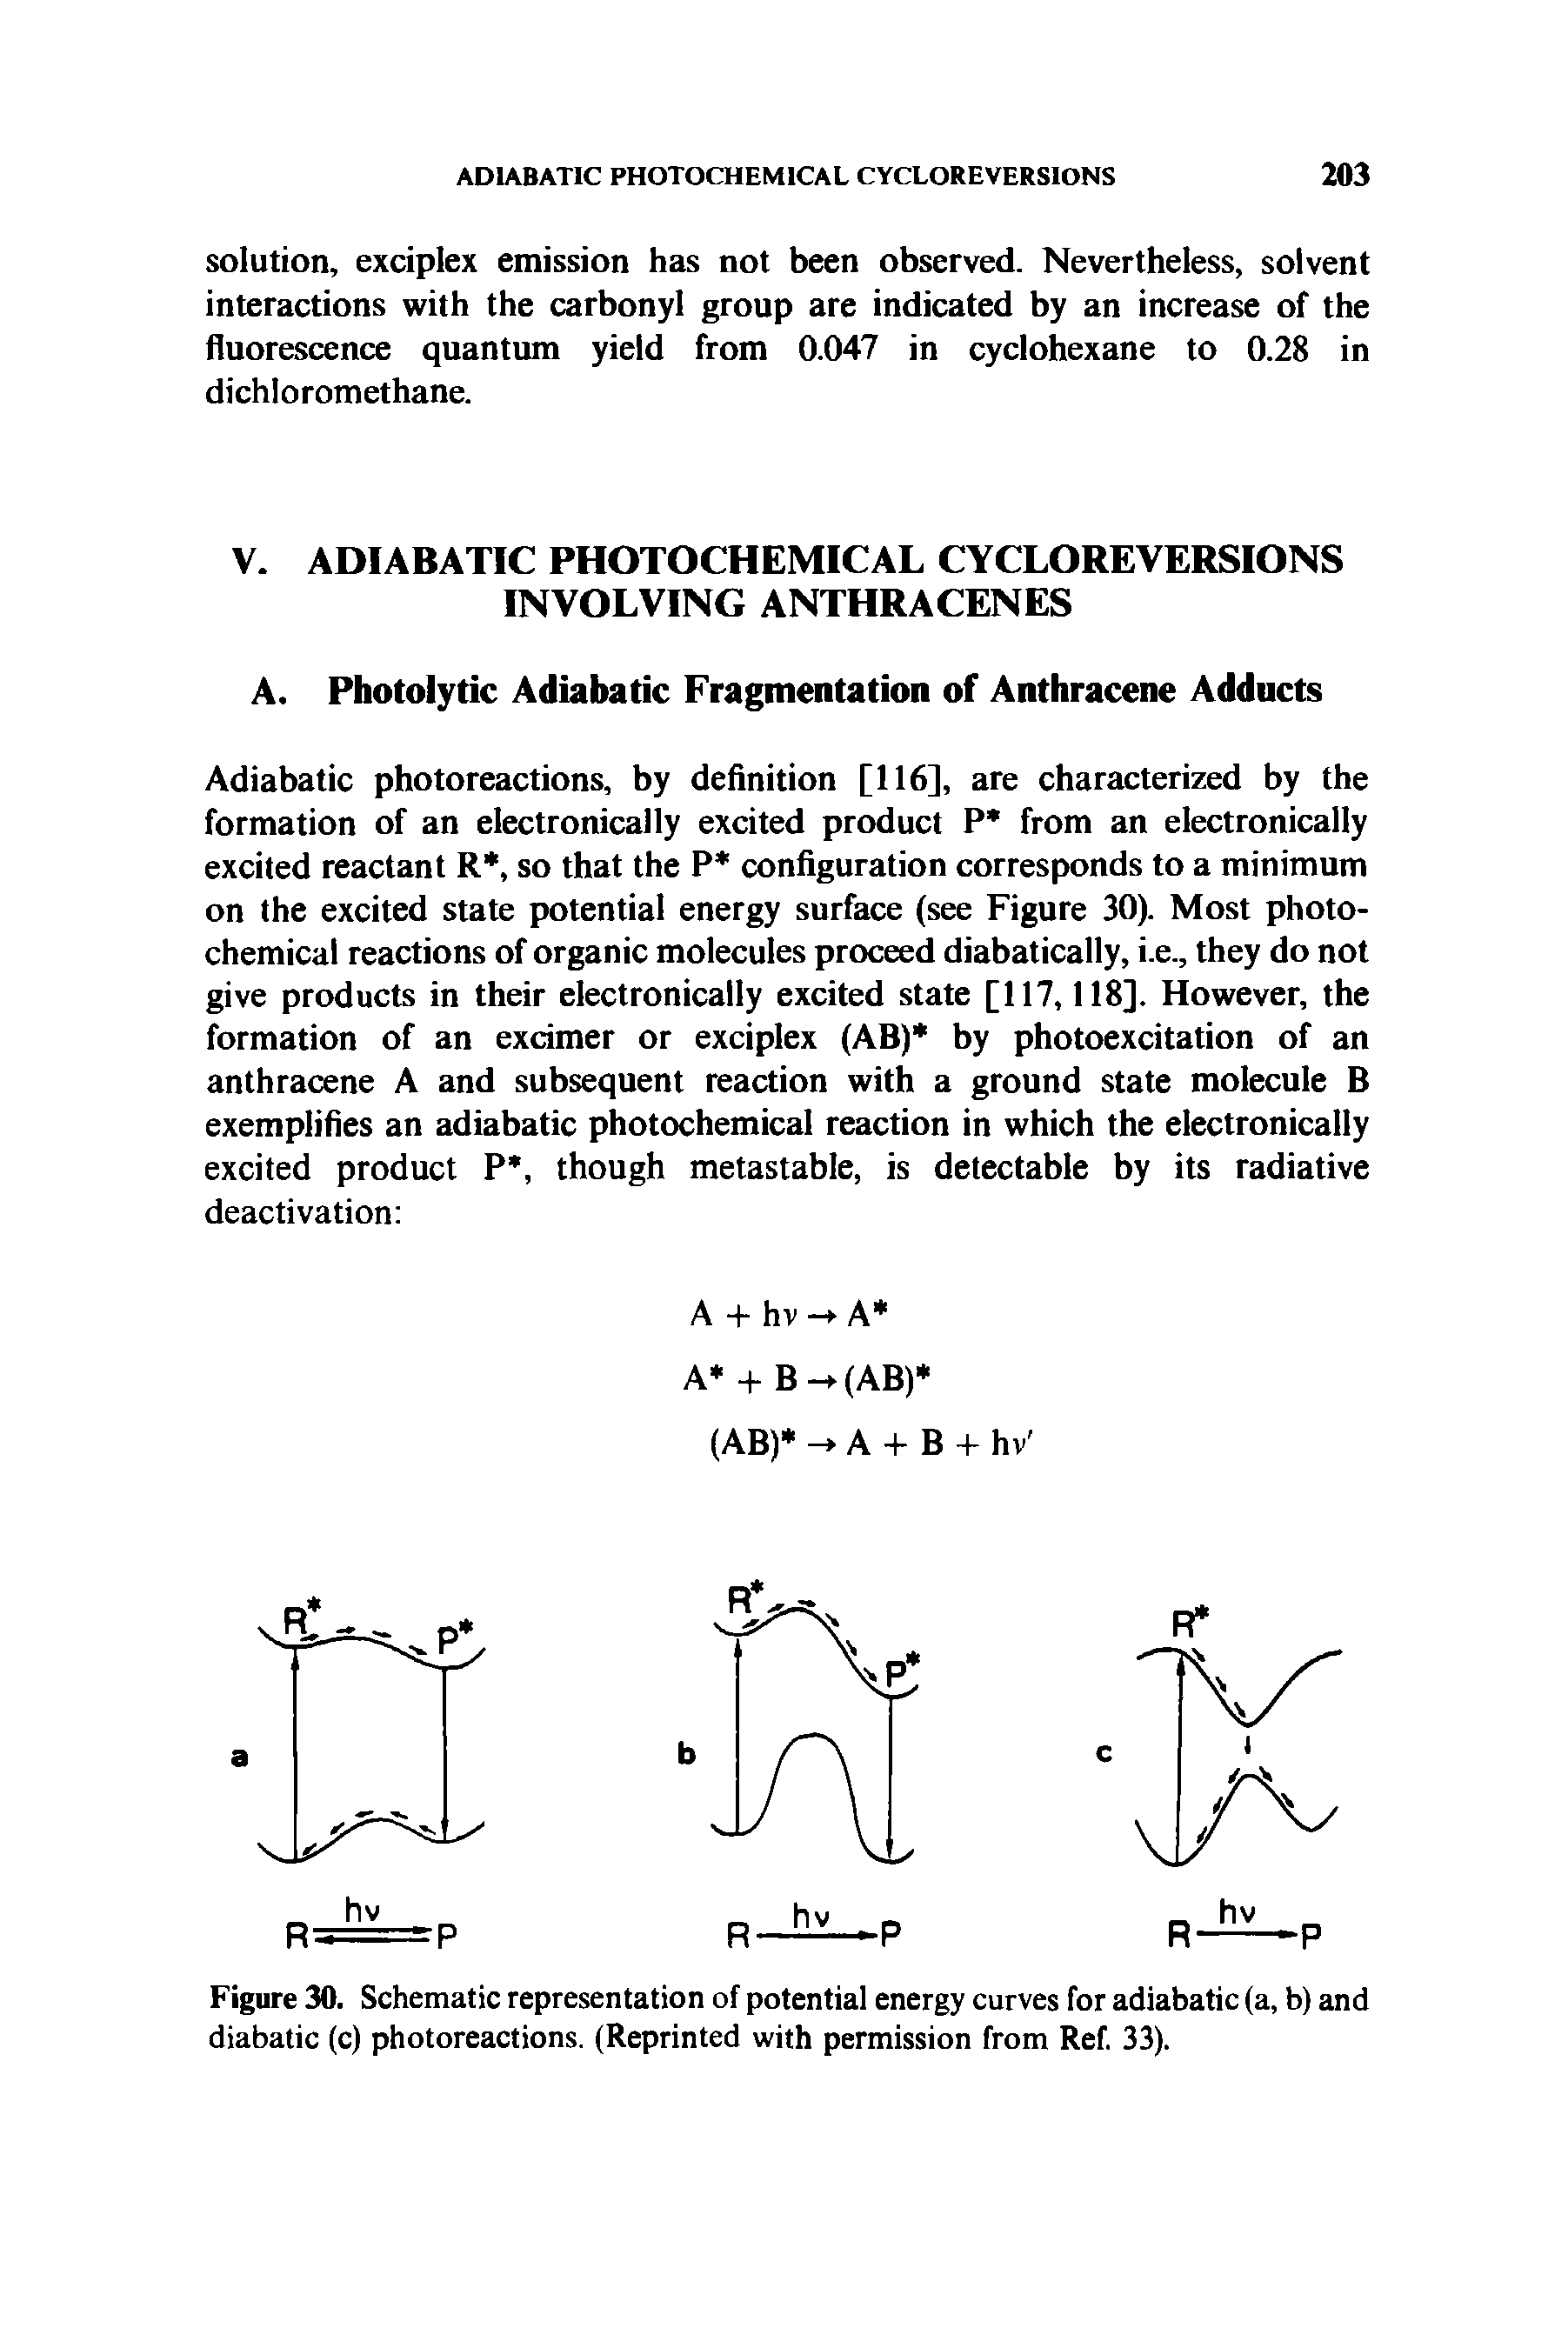 Figure 30. Schematic representation of potential energy curves for adiabatic (a, b) and diabatic (c) photoreactions. (Reprinted with permission from Ref. 33).